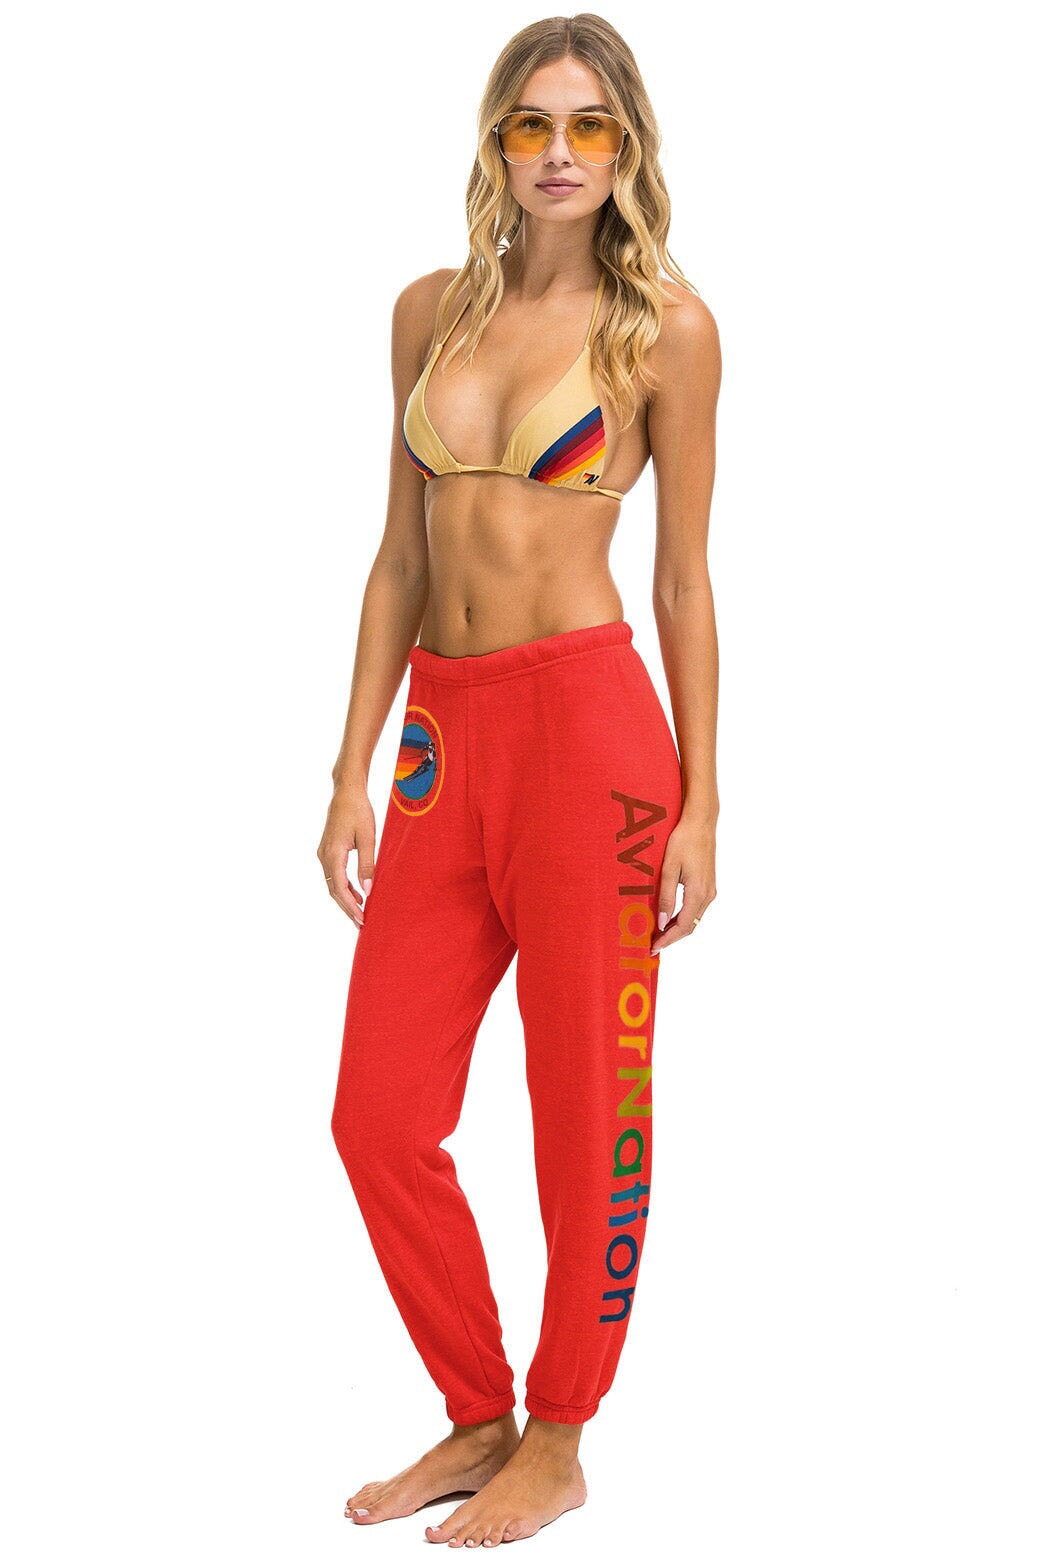 AVIATOR NATION VAIL SWEATPANTS - RED Women&#39;s Sweatpants Aviator Nation 